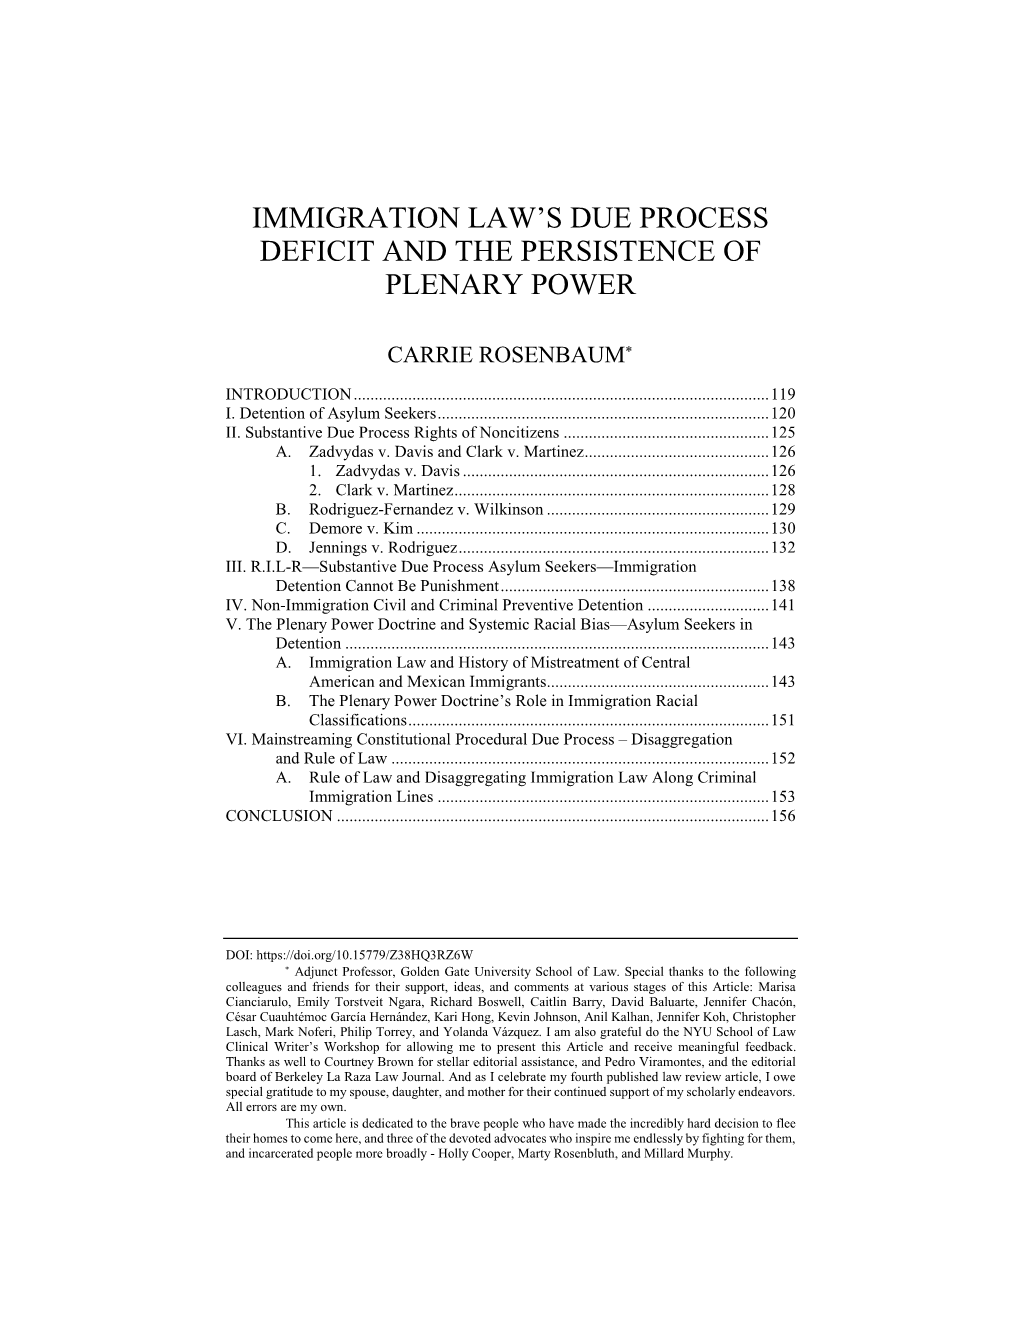 Immigration Law's Due Process Deficit and the Persistence of Plenary Power